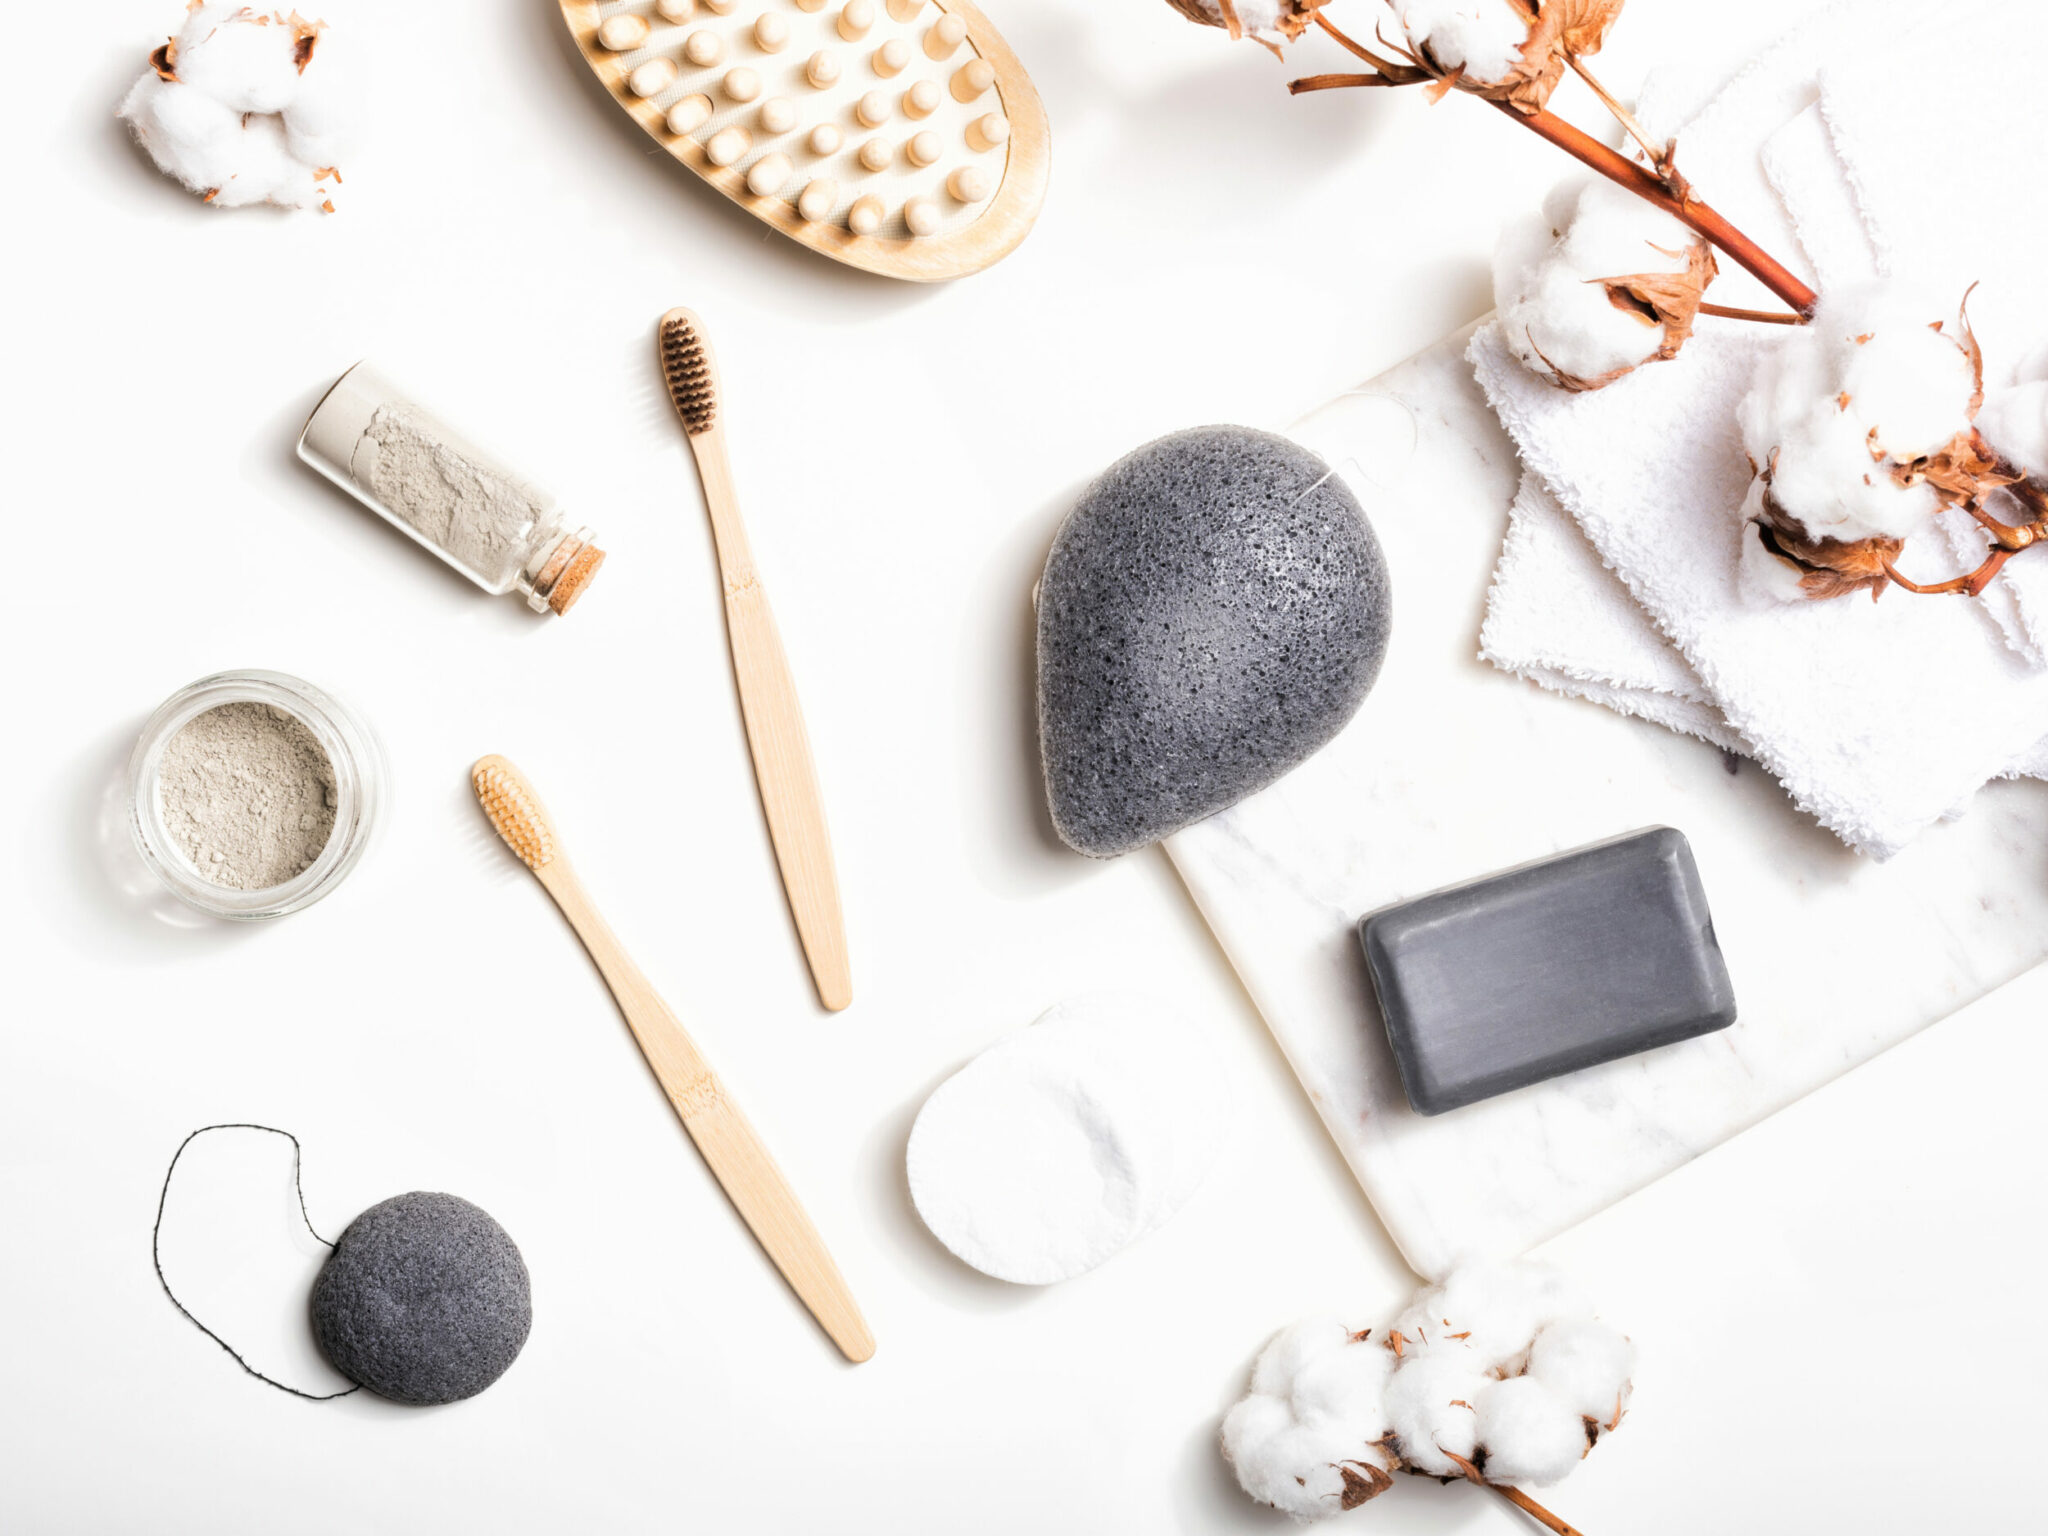 Bathroom natural accessories on white background. Eco bamboo toothbrushes, konjac sponge, clay mask, reusable cotton pads. Plastic free and zero waste concept